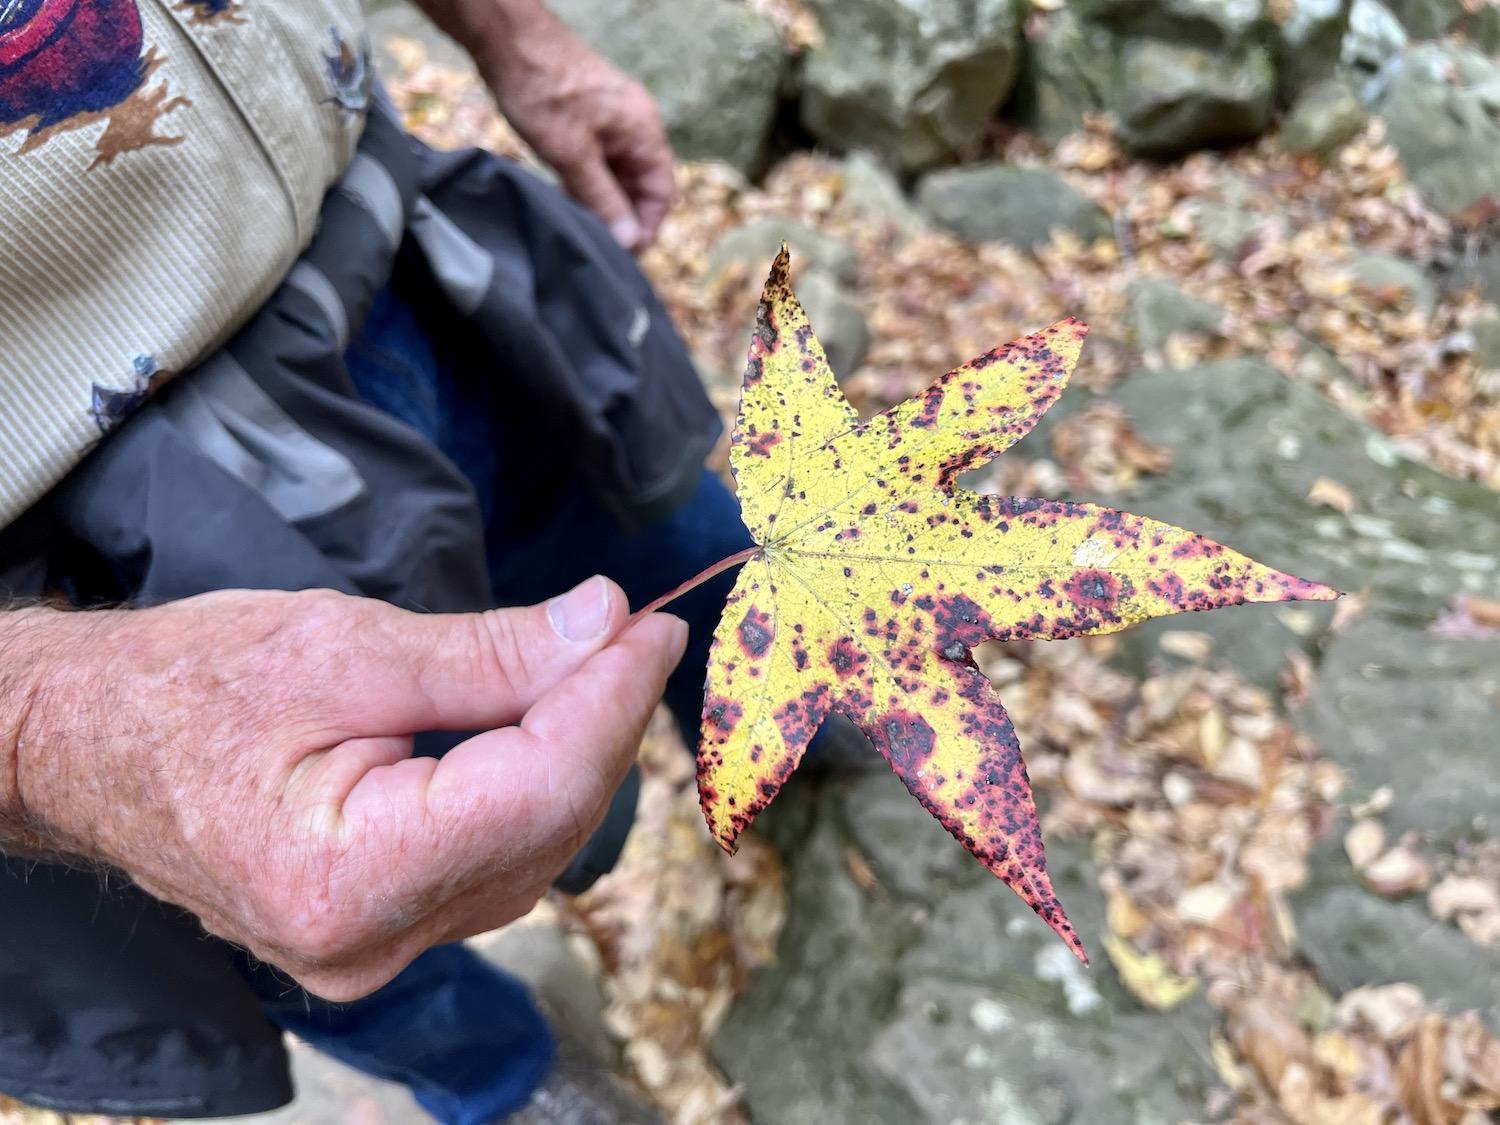 The colorful leaf of a sweetgum tree, found on Lost Valley Trail.